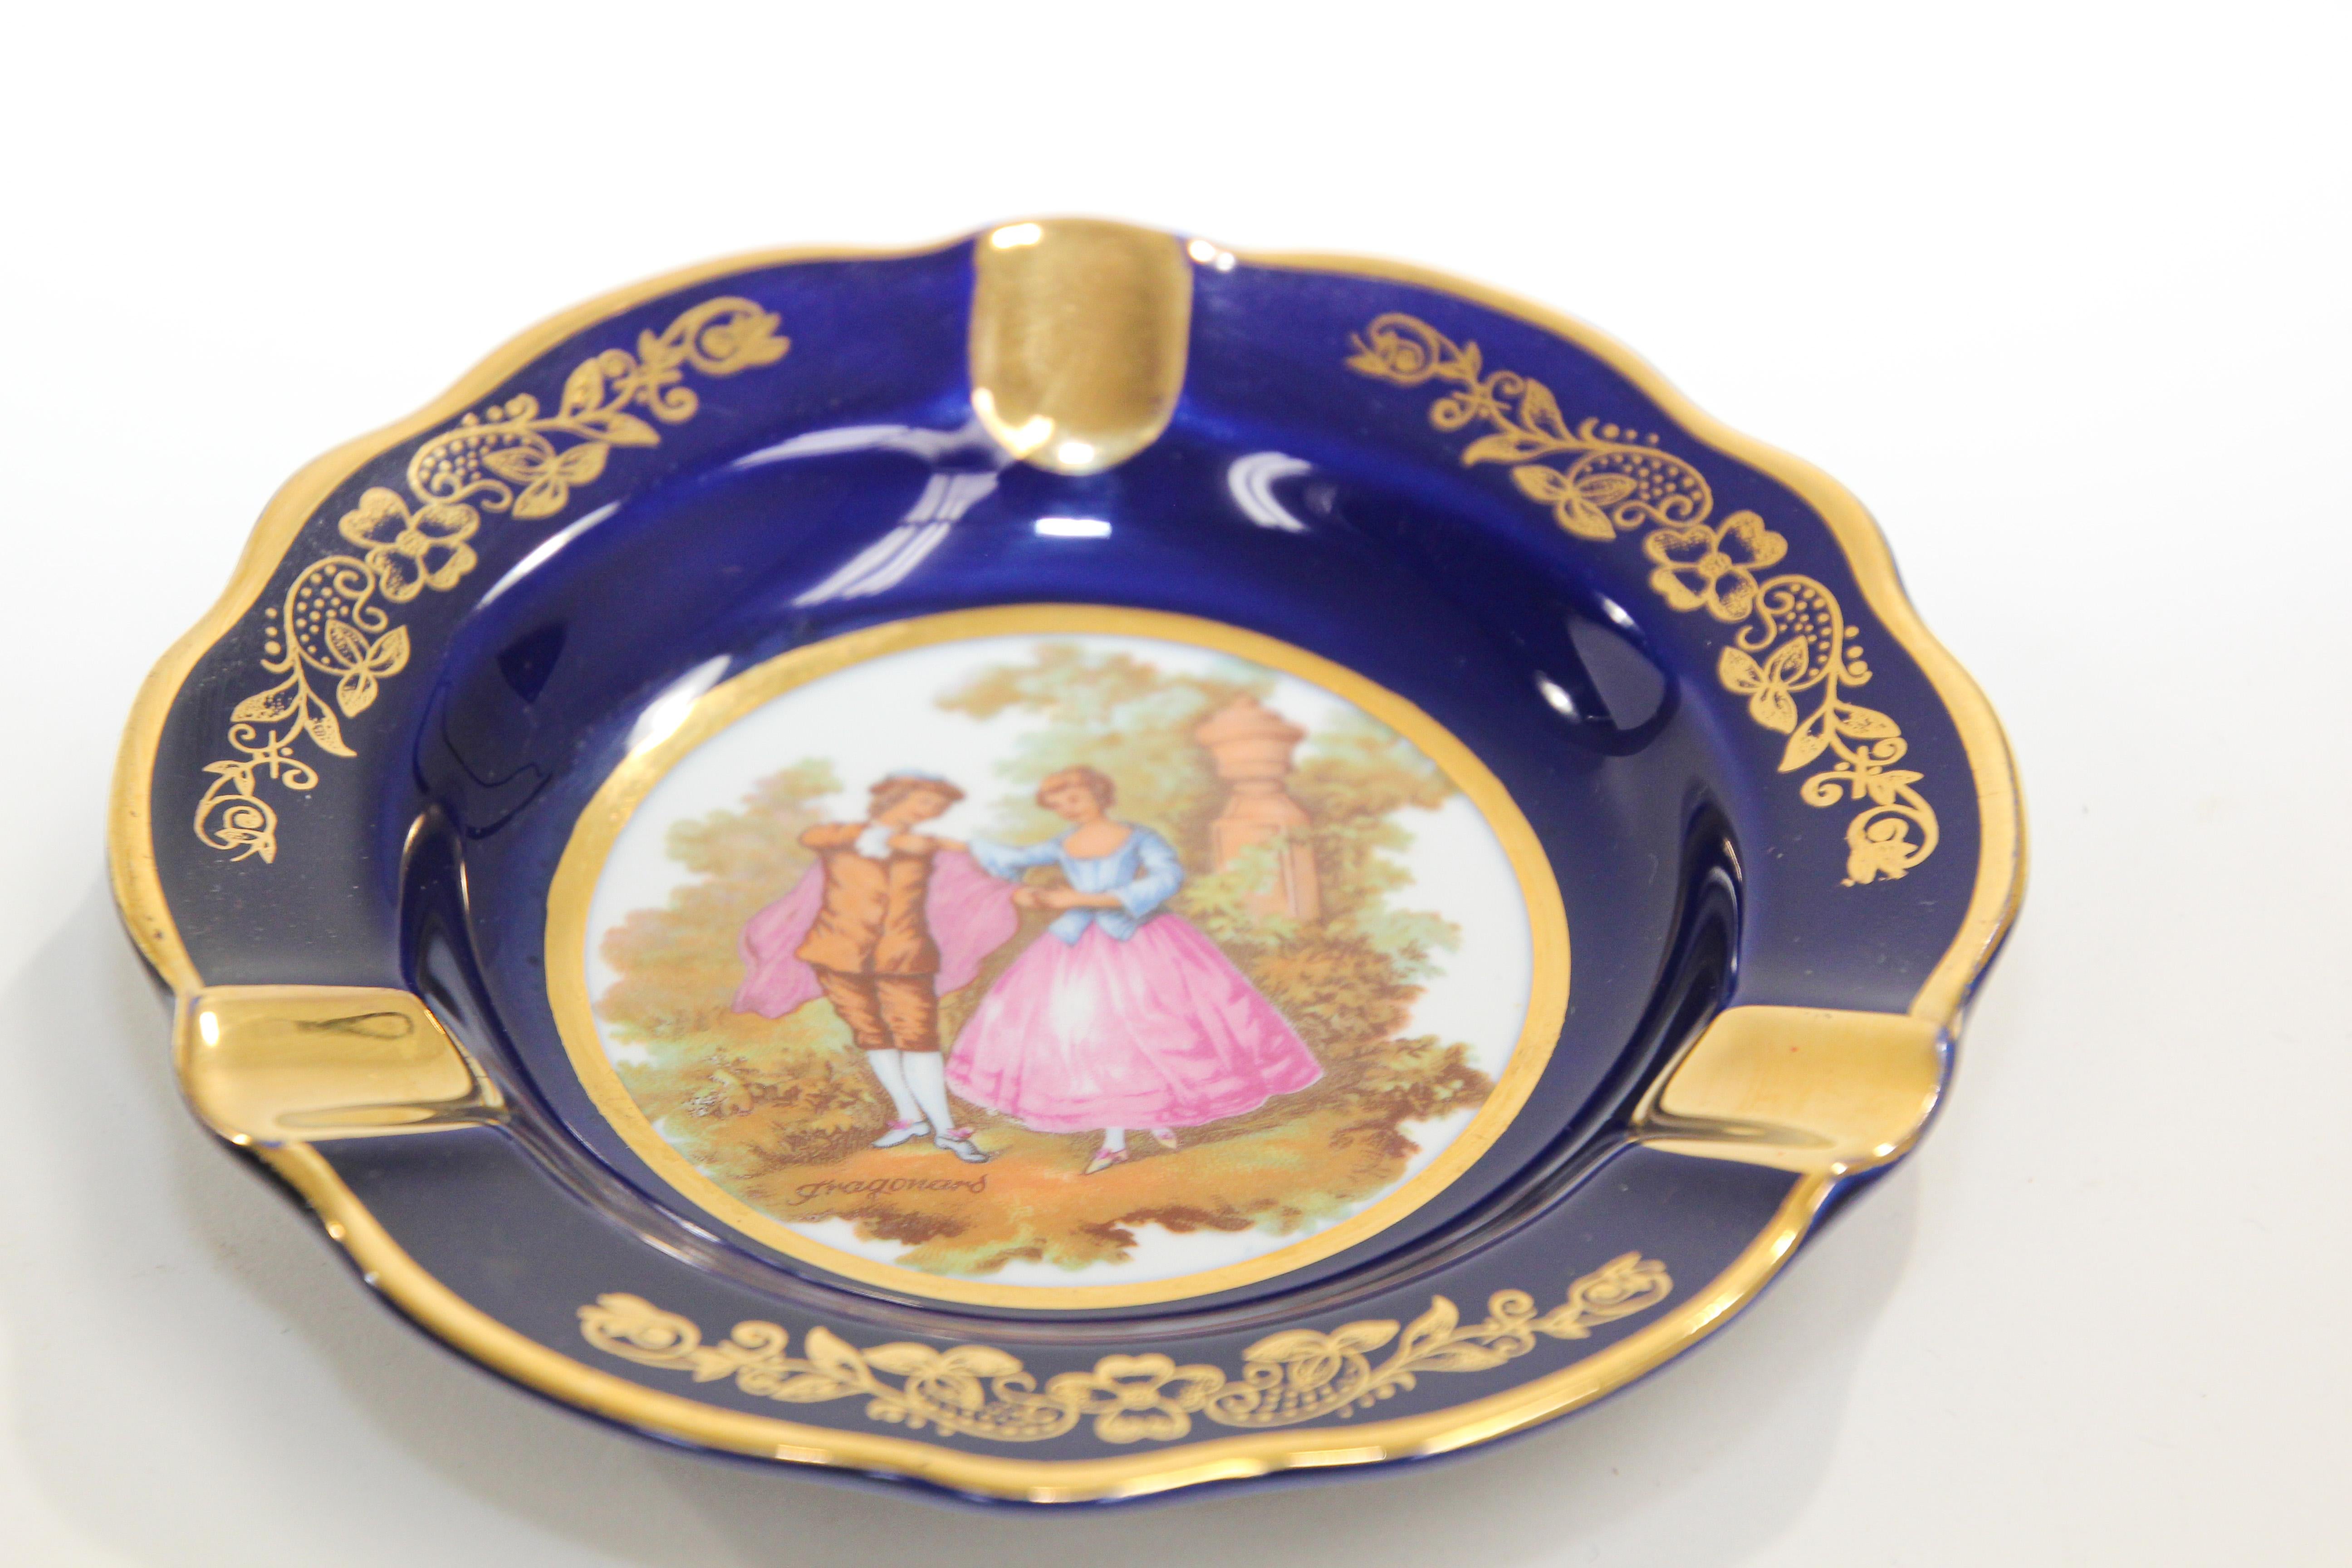 Vintage Limoges France porcelain round ashtray cobalt blue and gold.
Elegant precious porcelain ashtray hand painted with a scene of a couple in the style of French artist Fragonard.
Use it as an ashtray or for decorative accent dish.
Limoges